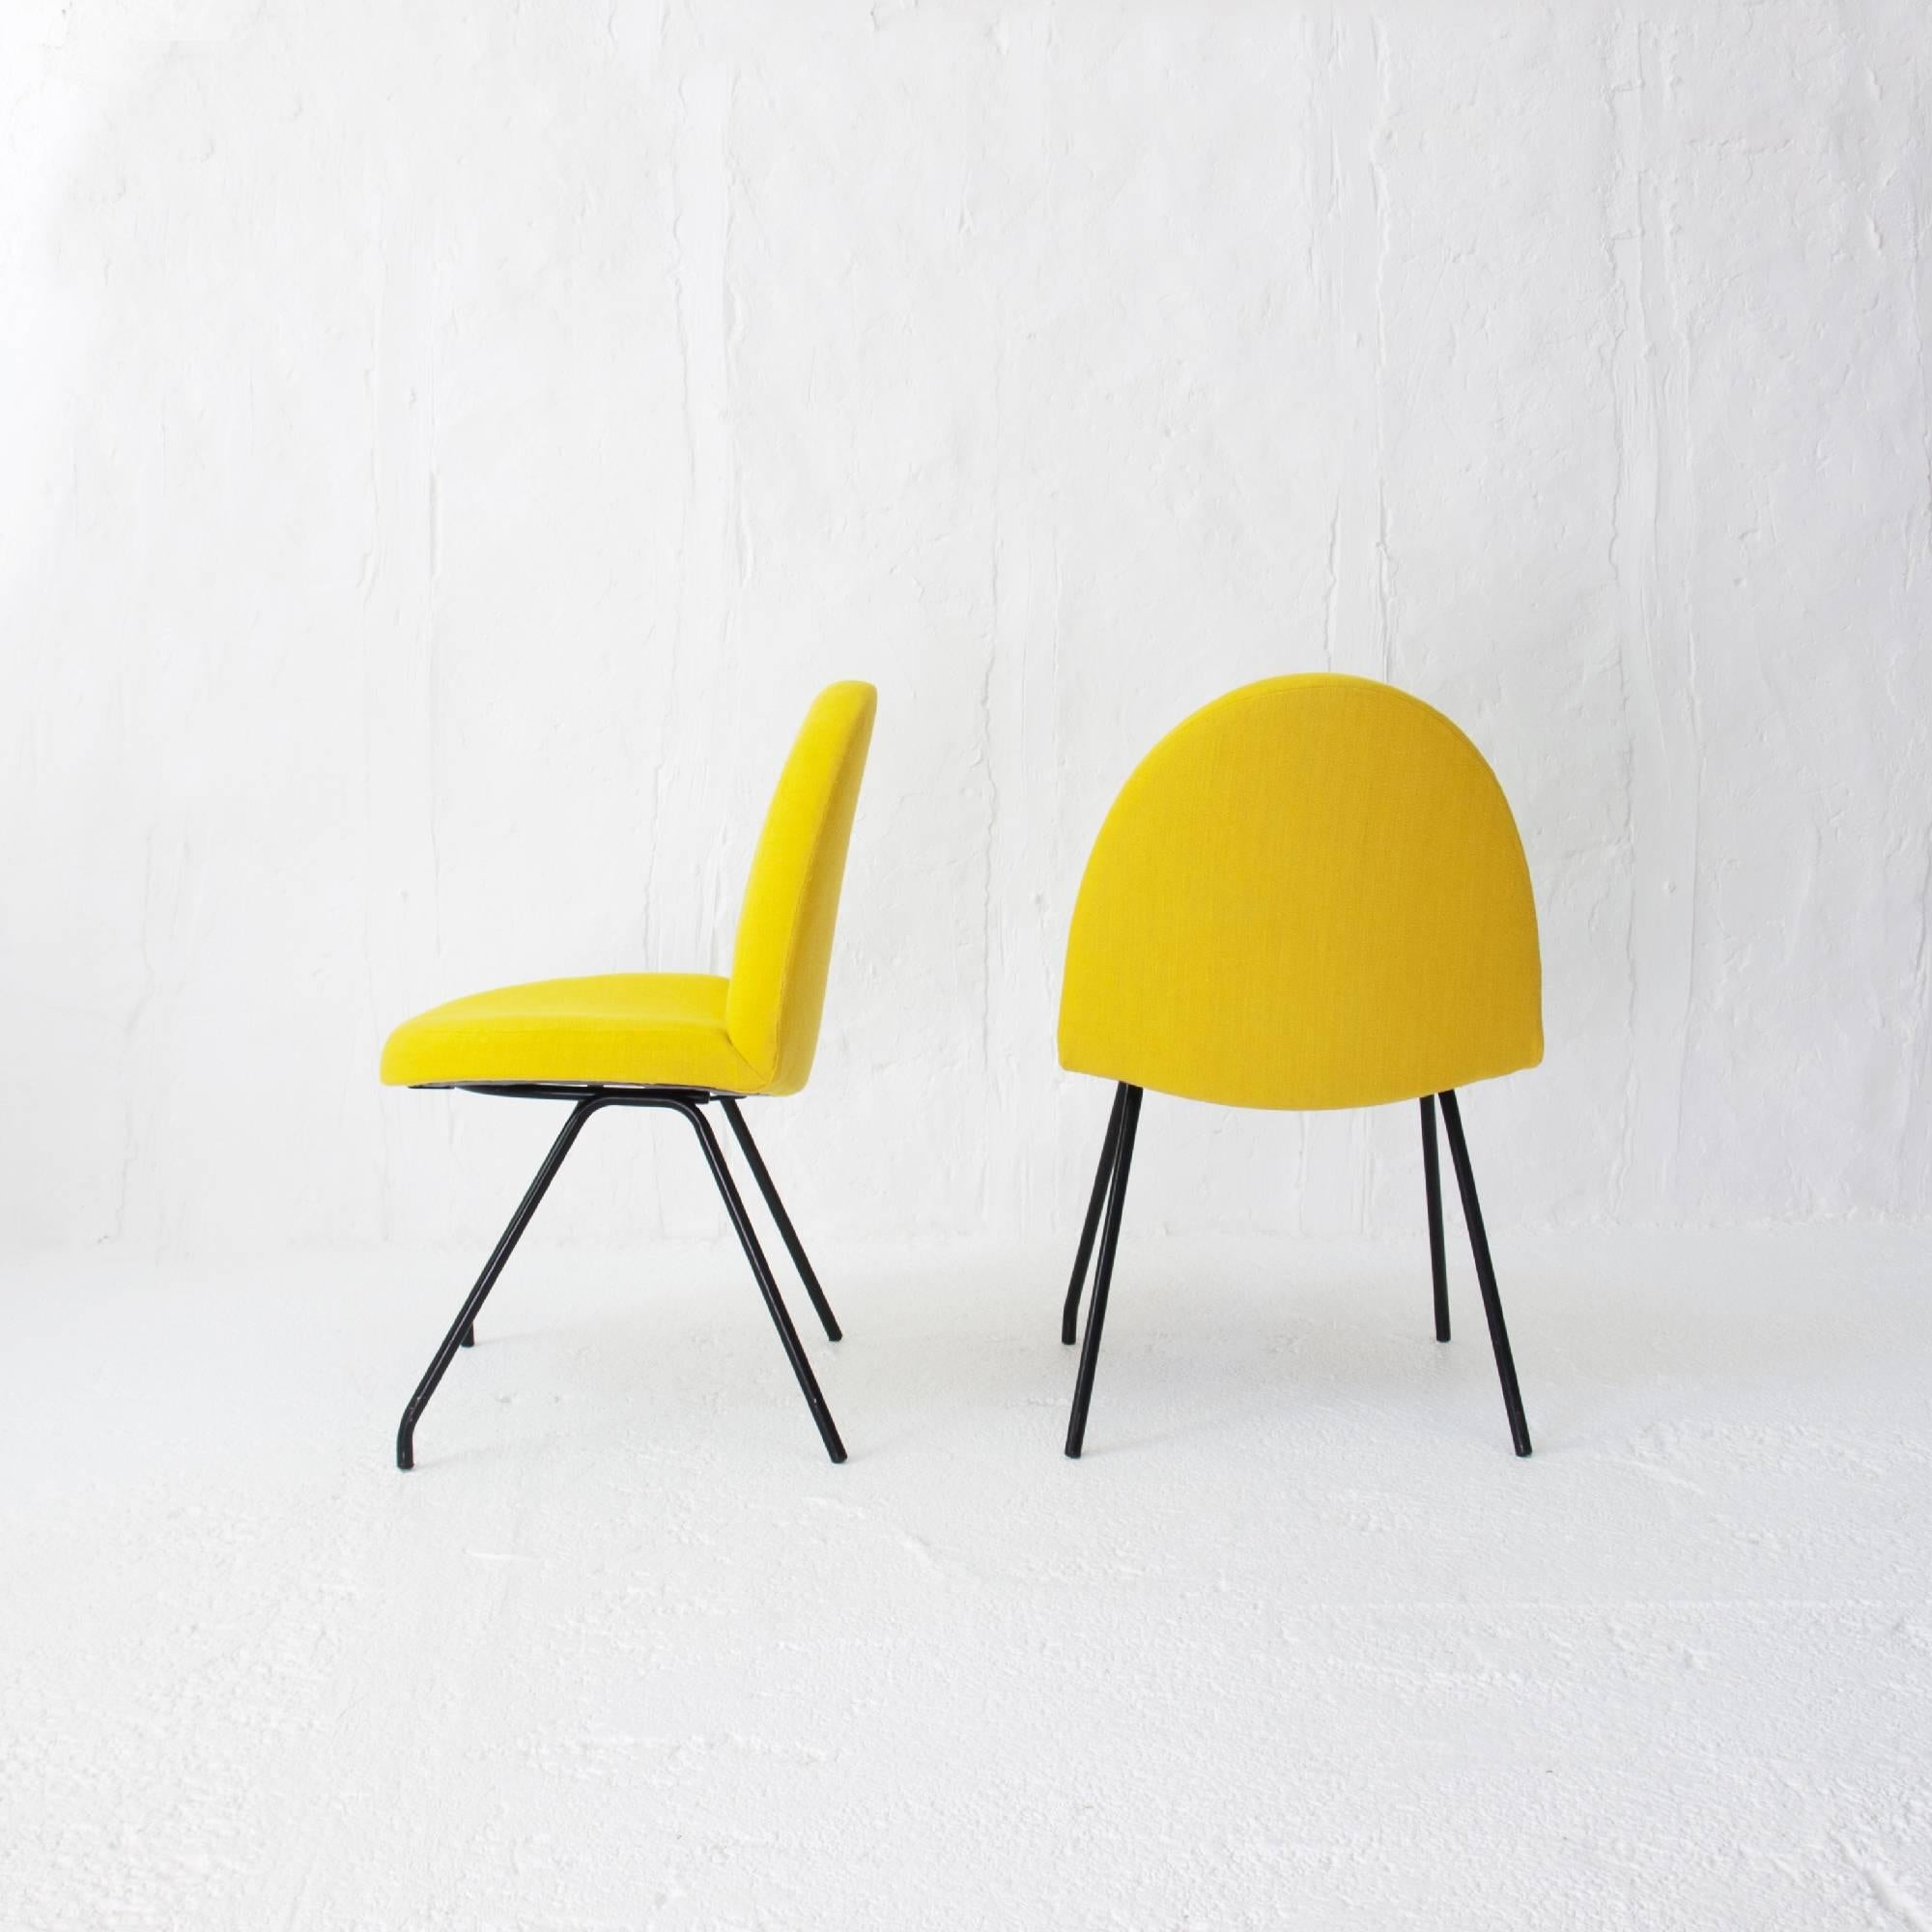 French Joseph-André Motte Pair of Chairs 771 for Steiner